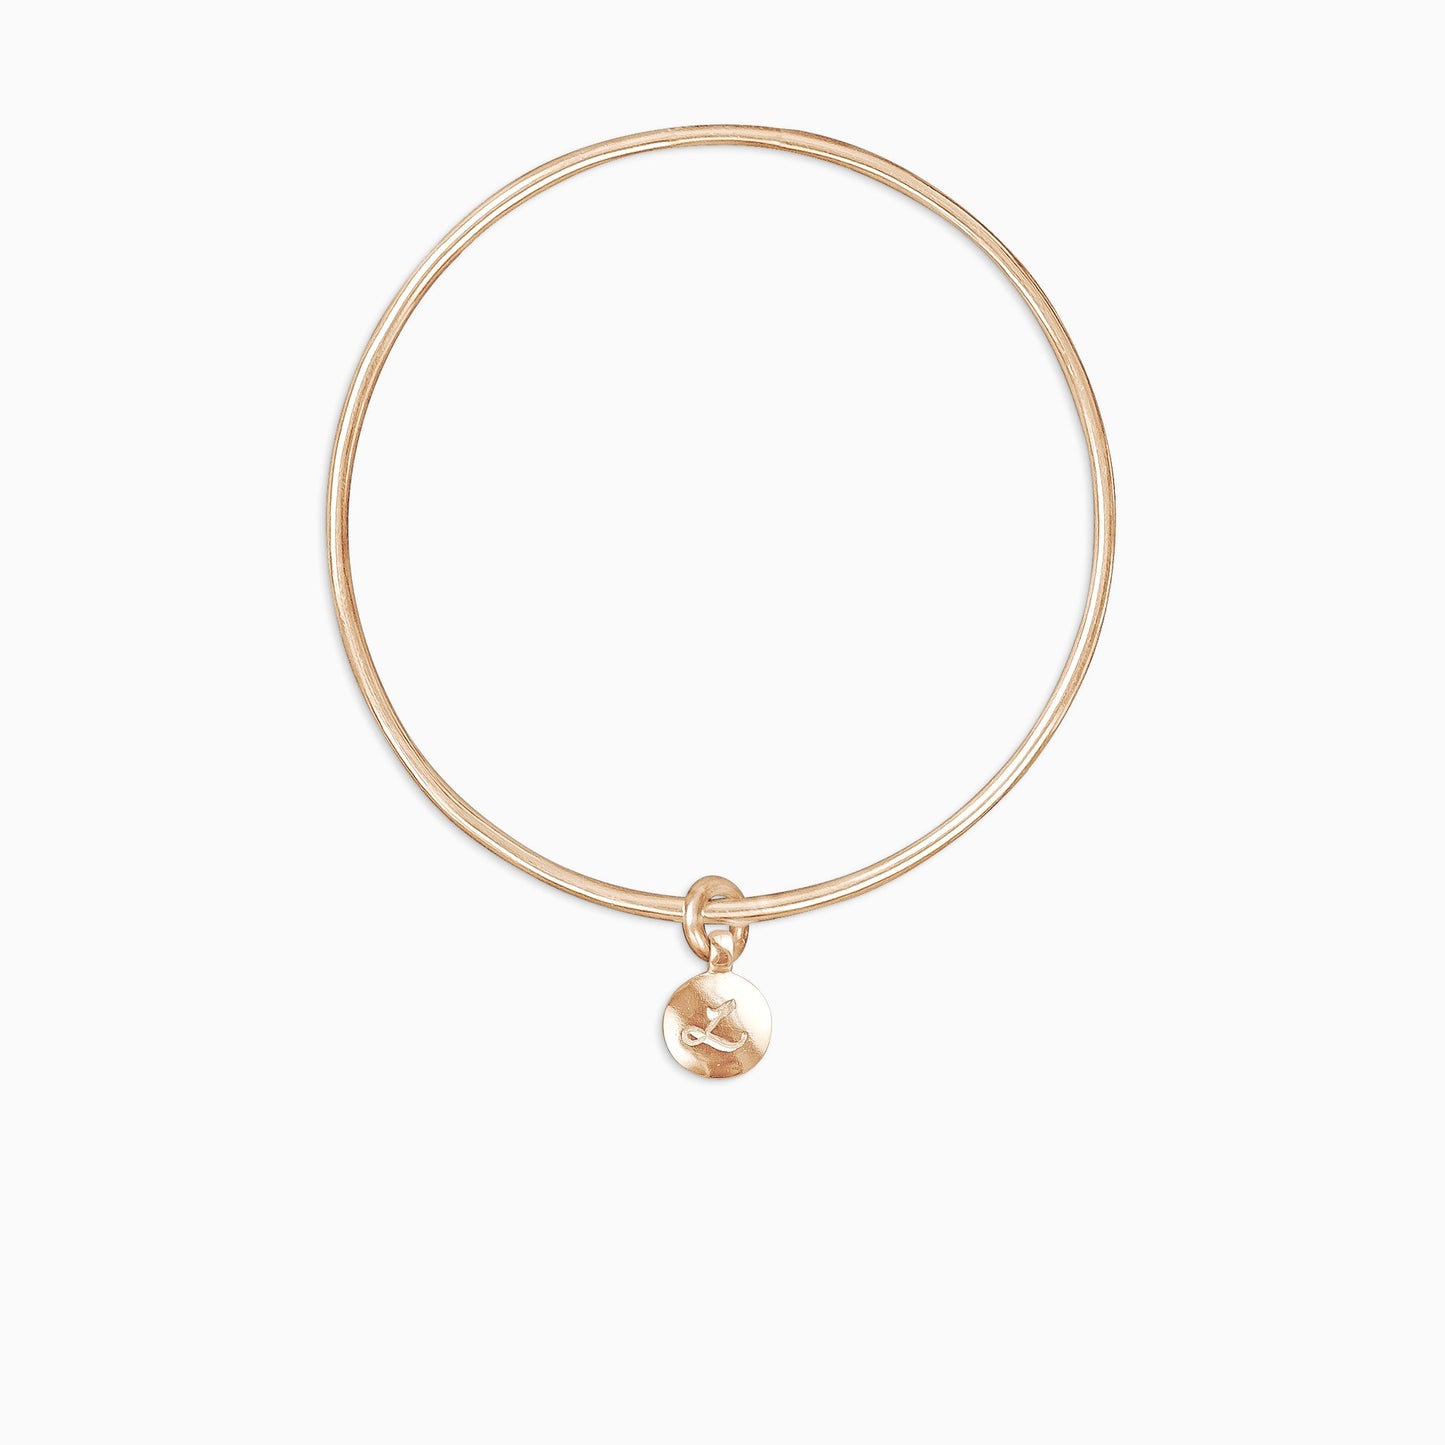 An 18ct Fairtrade rose gold round, smooth charm engraved with a single letter, choose from A-Z, freely moving on a round wire bangle. Charm 13mm diameter. Bangle 63mm inside diameter x 2mm round wire.